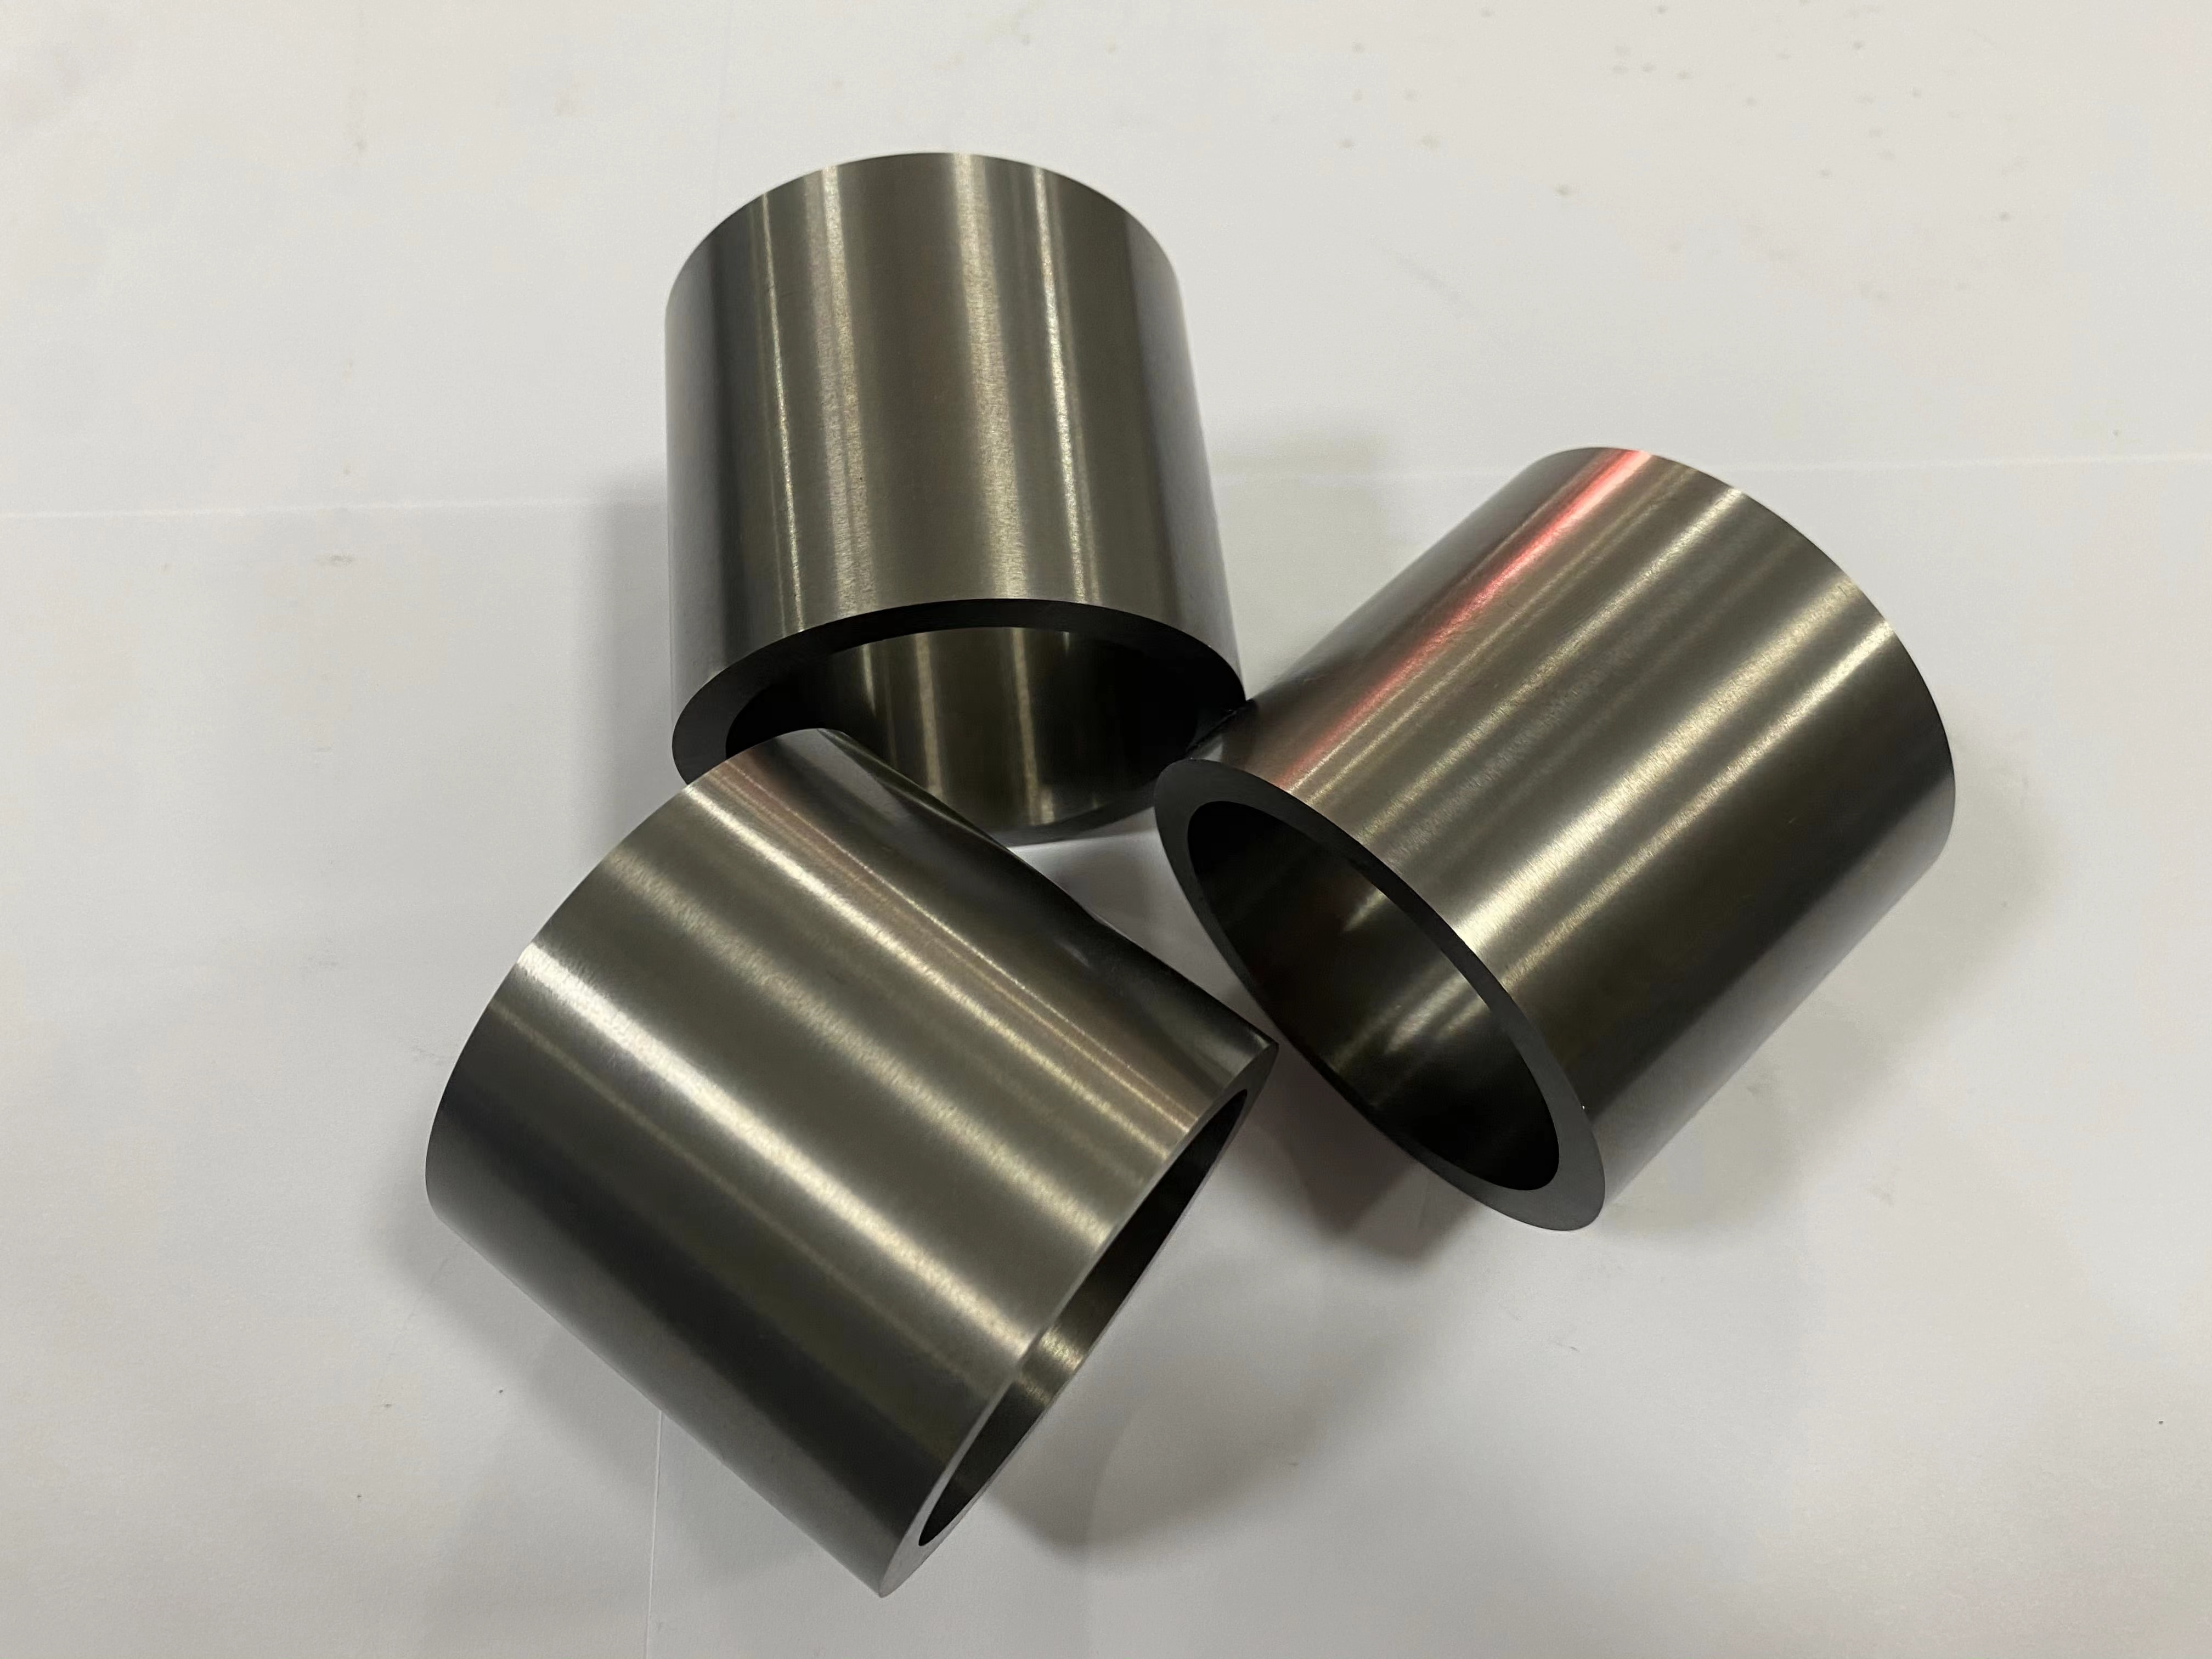 Characteristics of Cemented Carbide Wear Parts